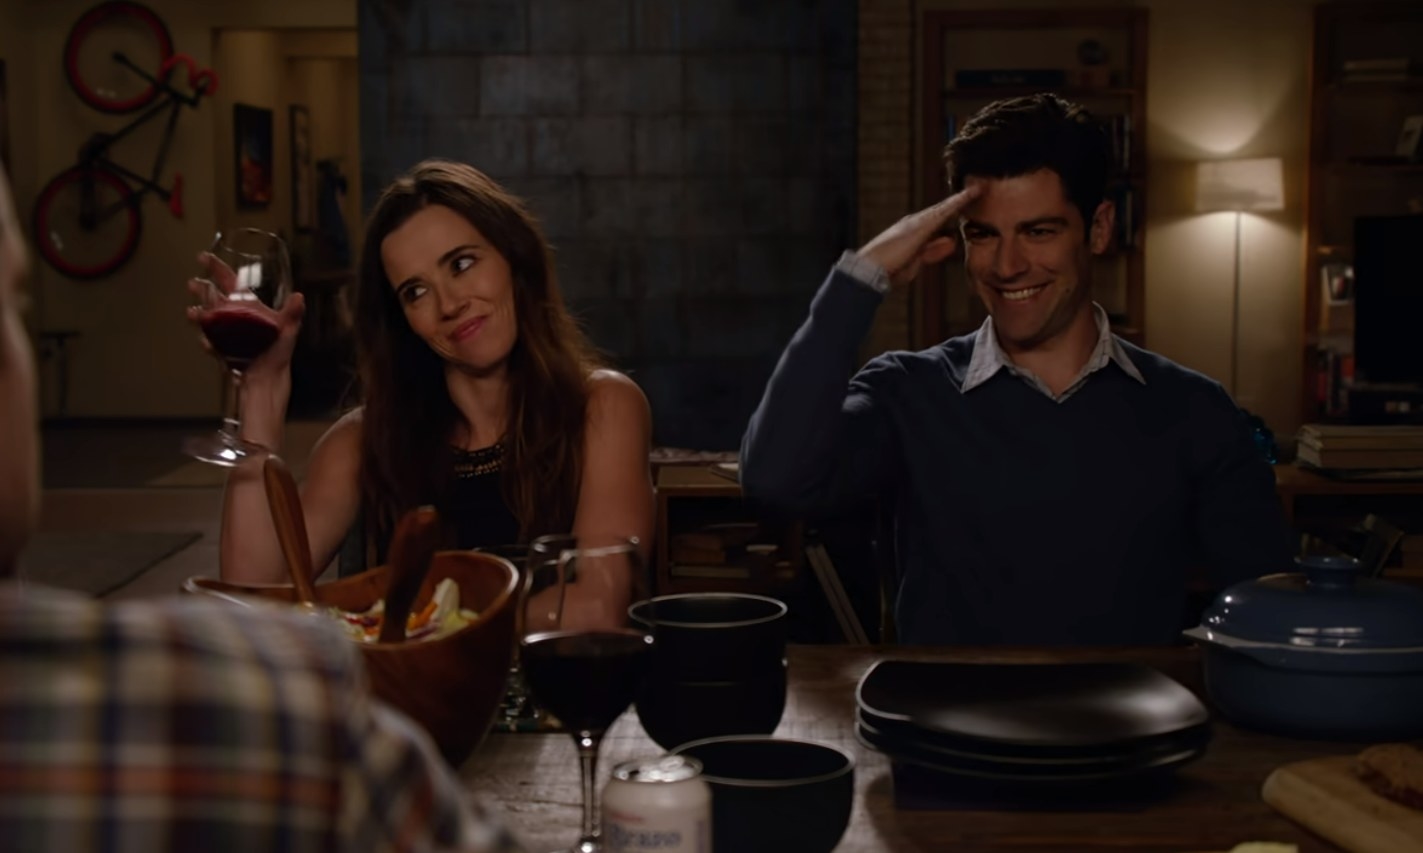 Abby raising a glass of wine while Schmidt sits next to her and salutes